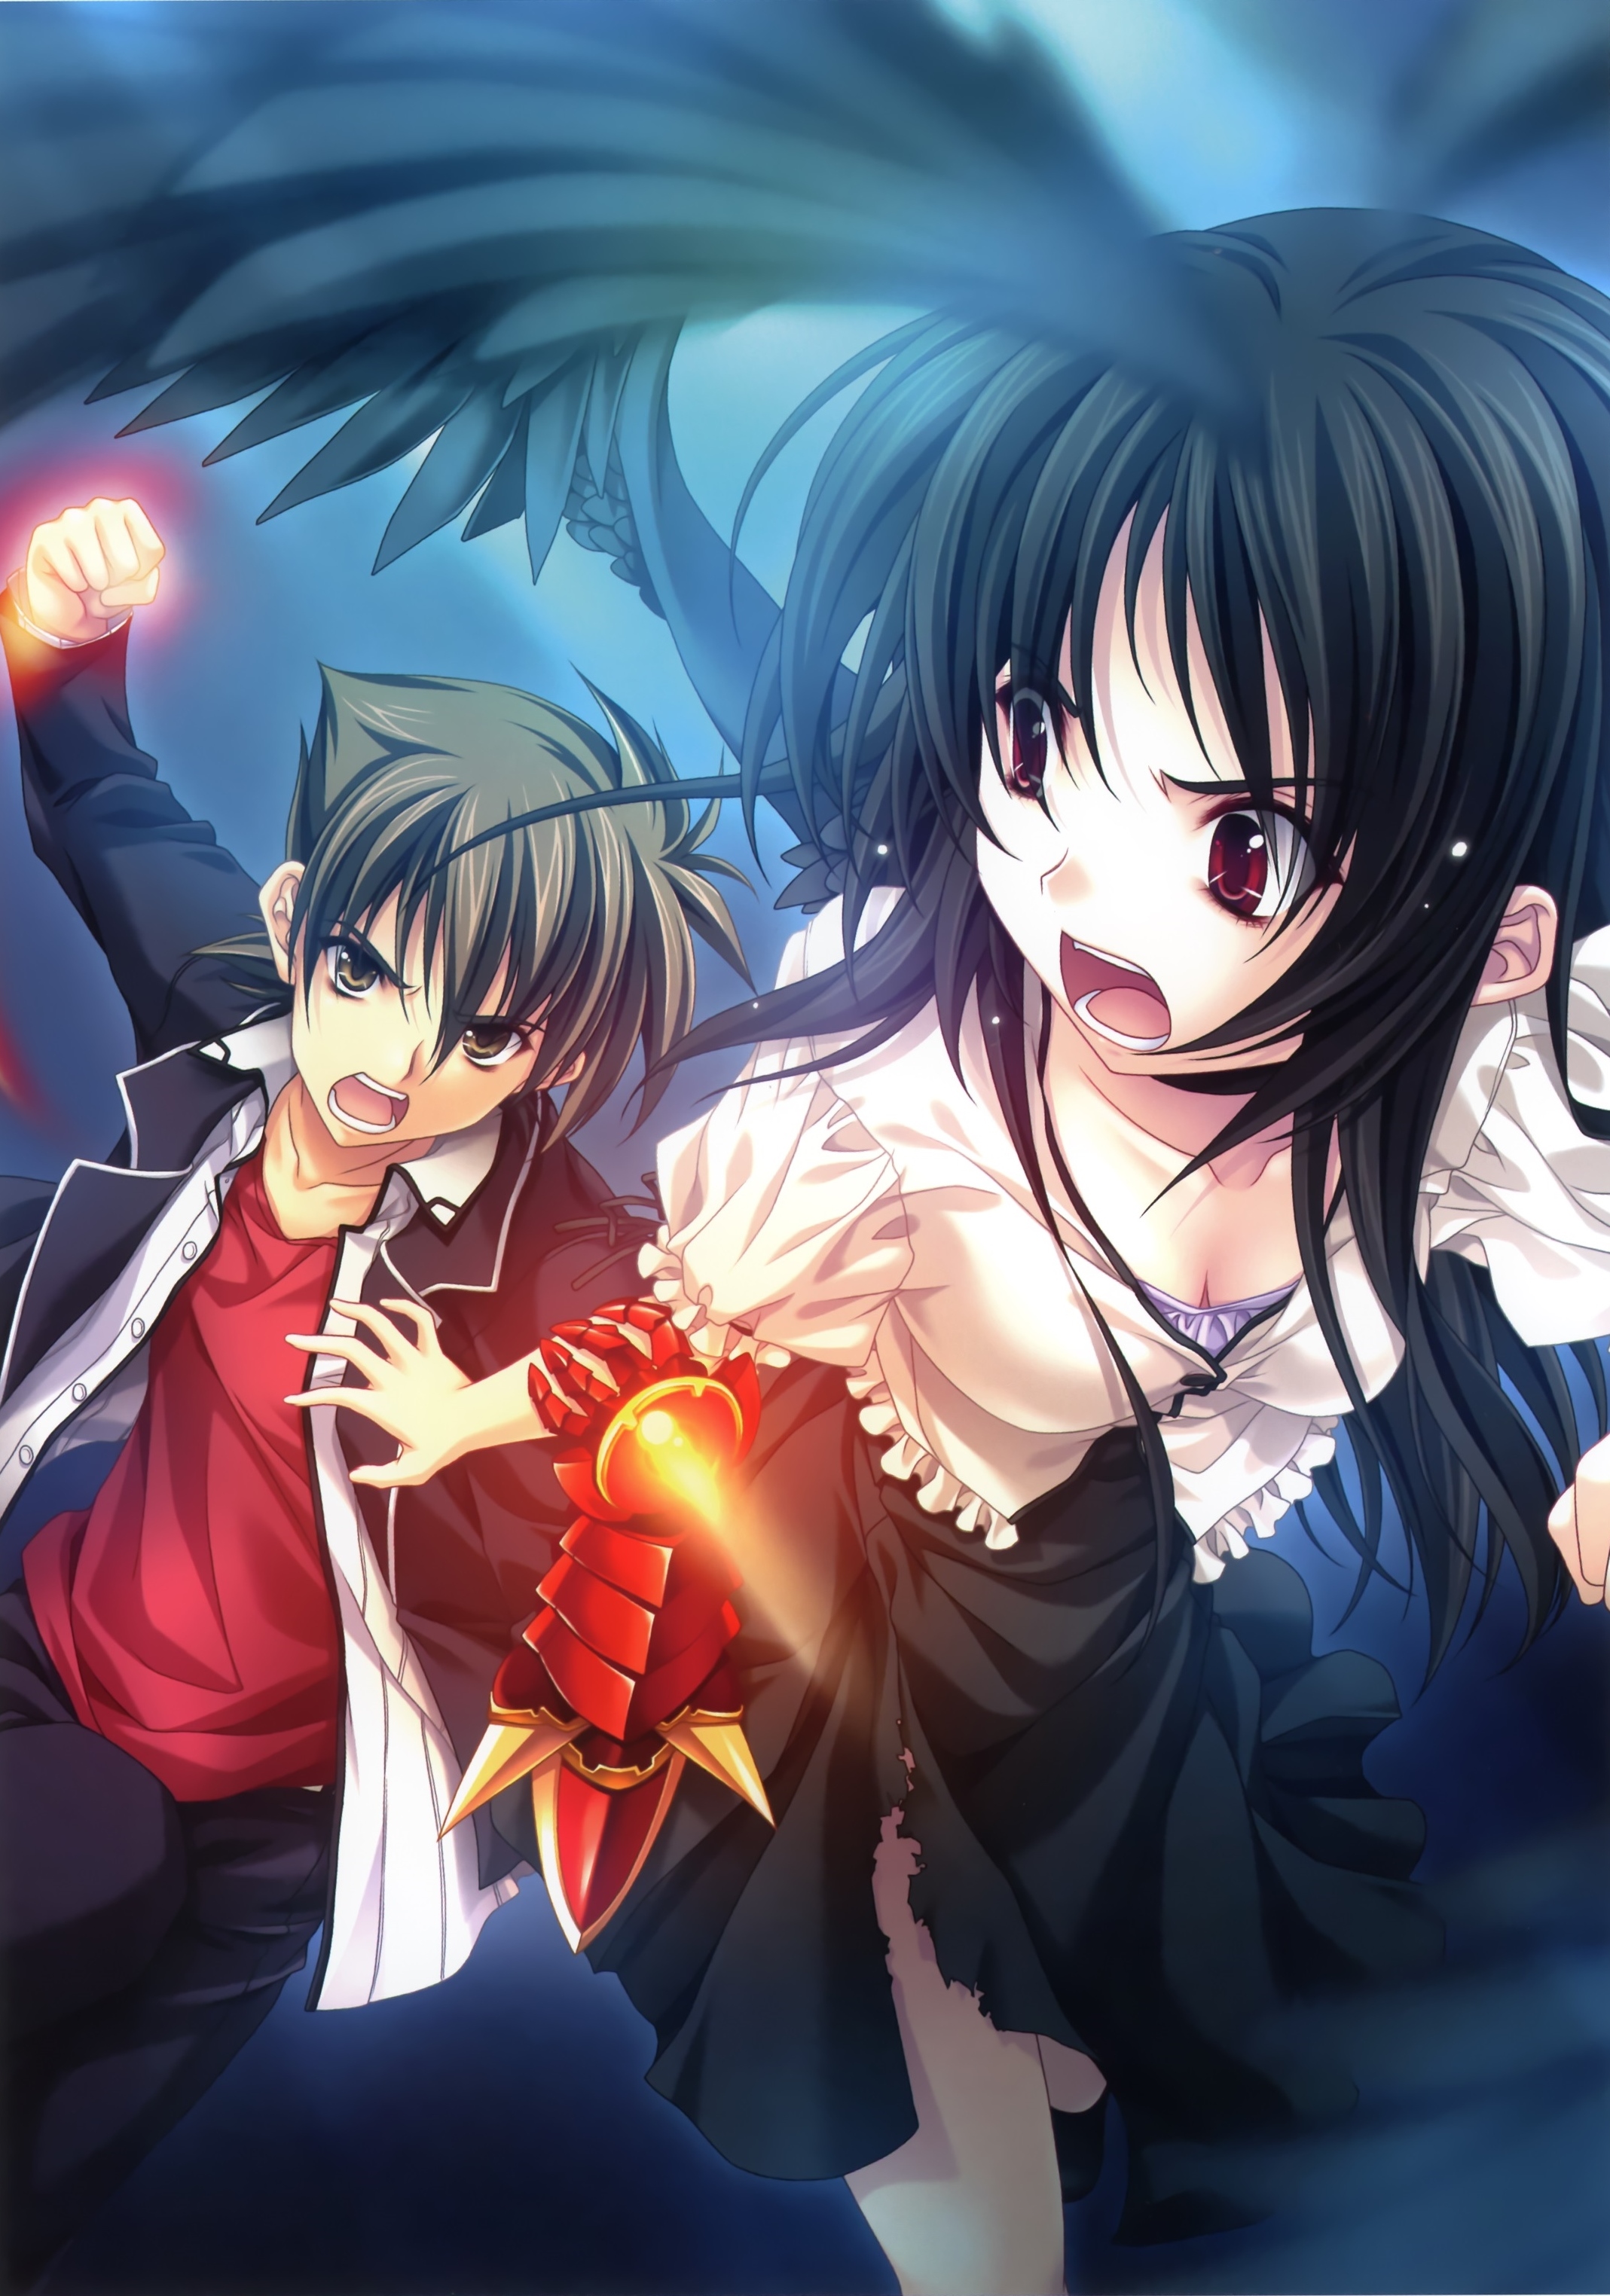 Download Related Wallpapers - Anime Fallen Angel Male PNG Image with No  Background - PNGkey.com